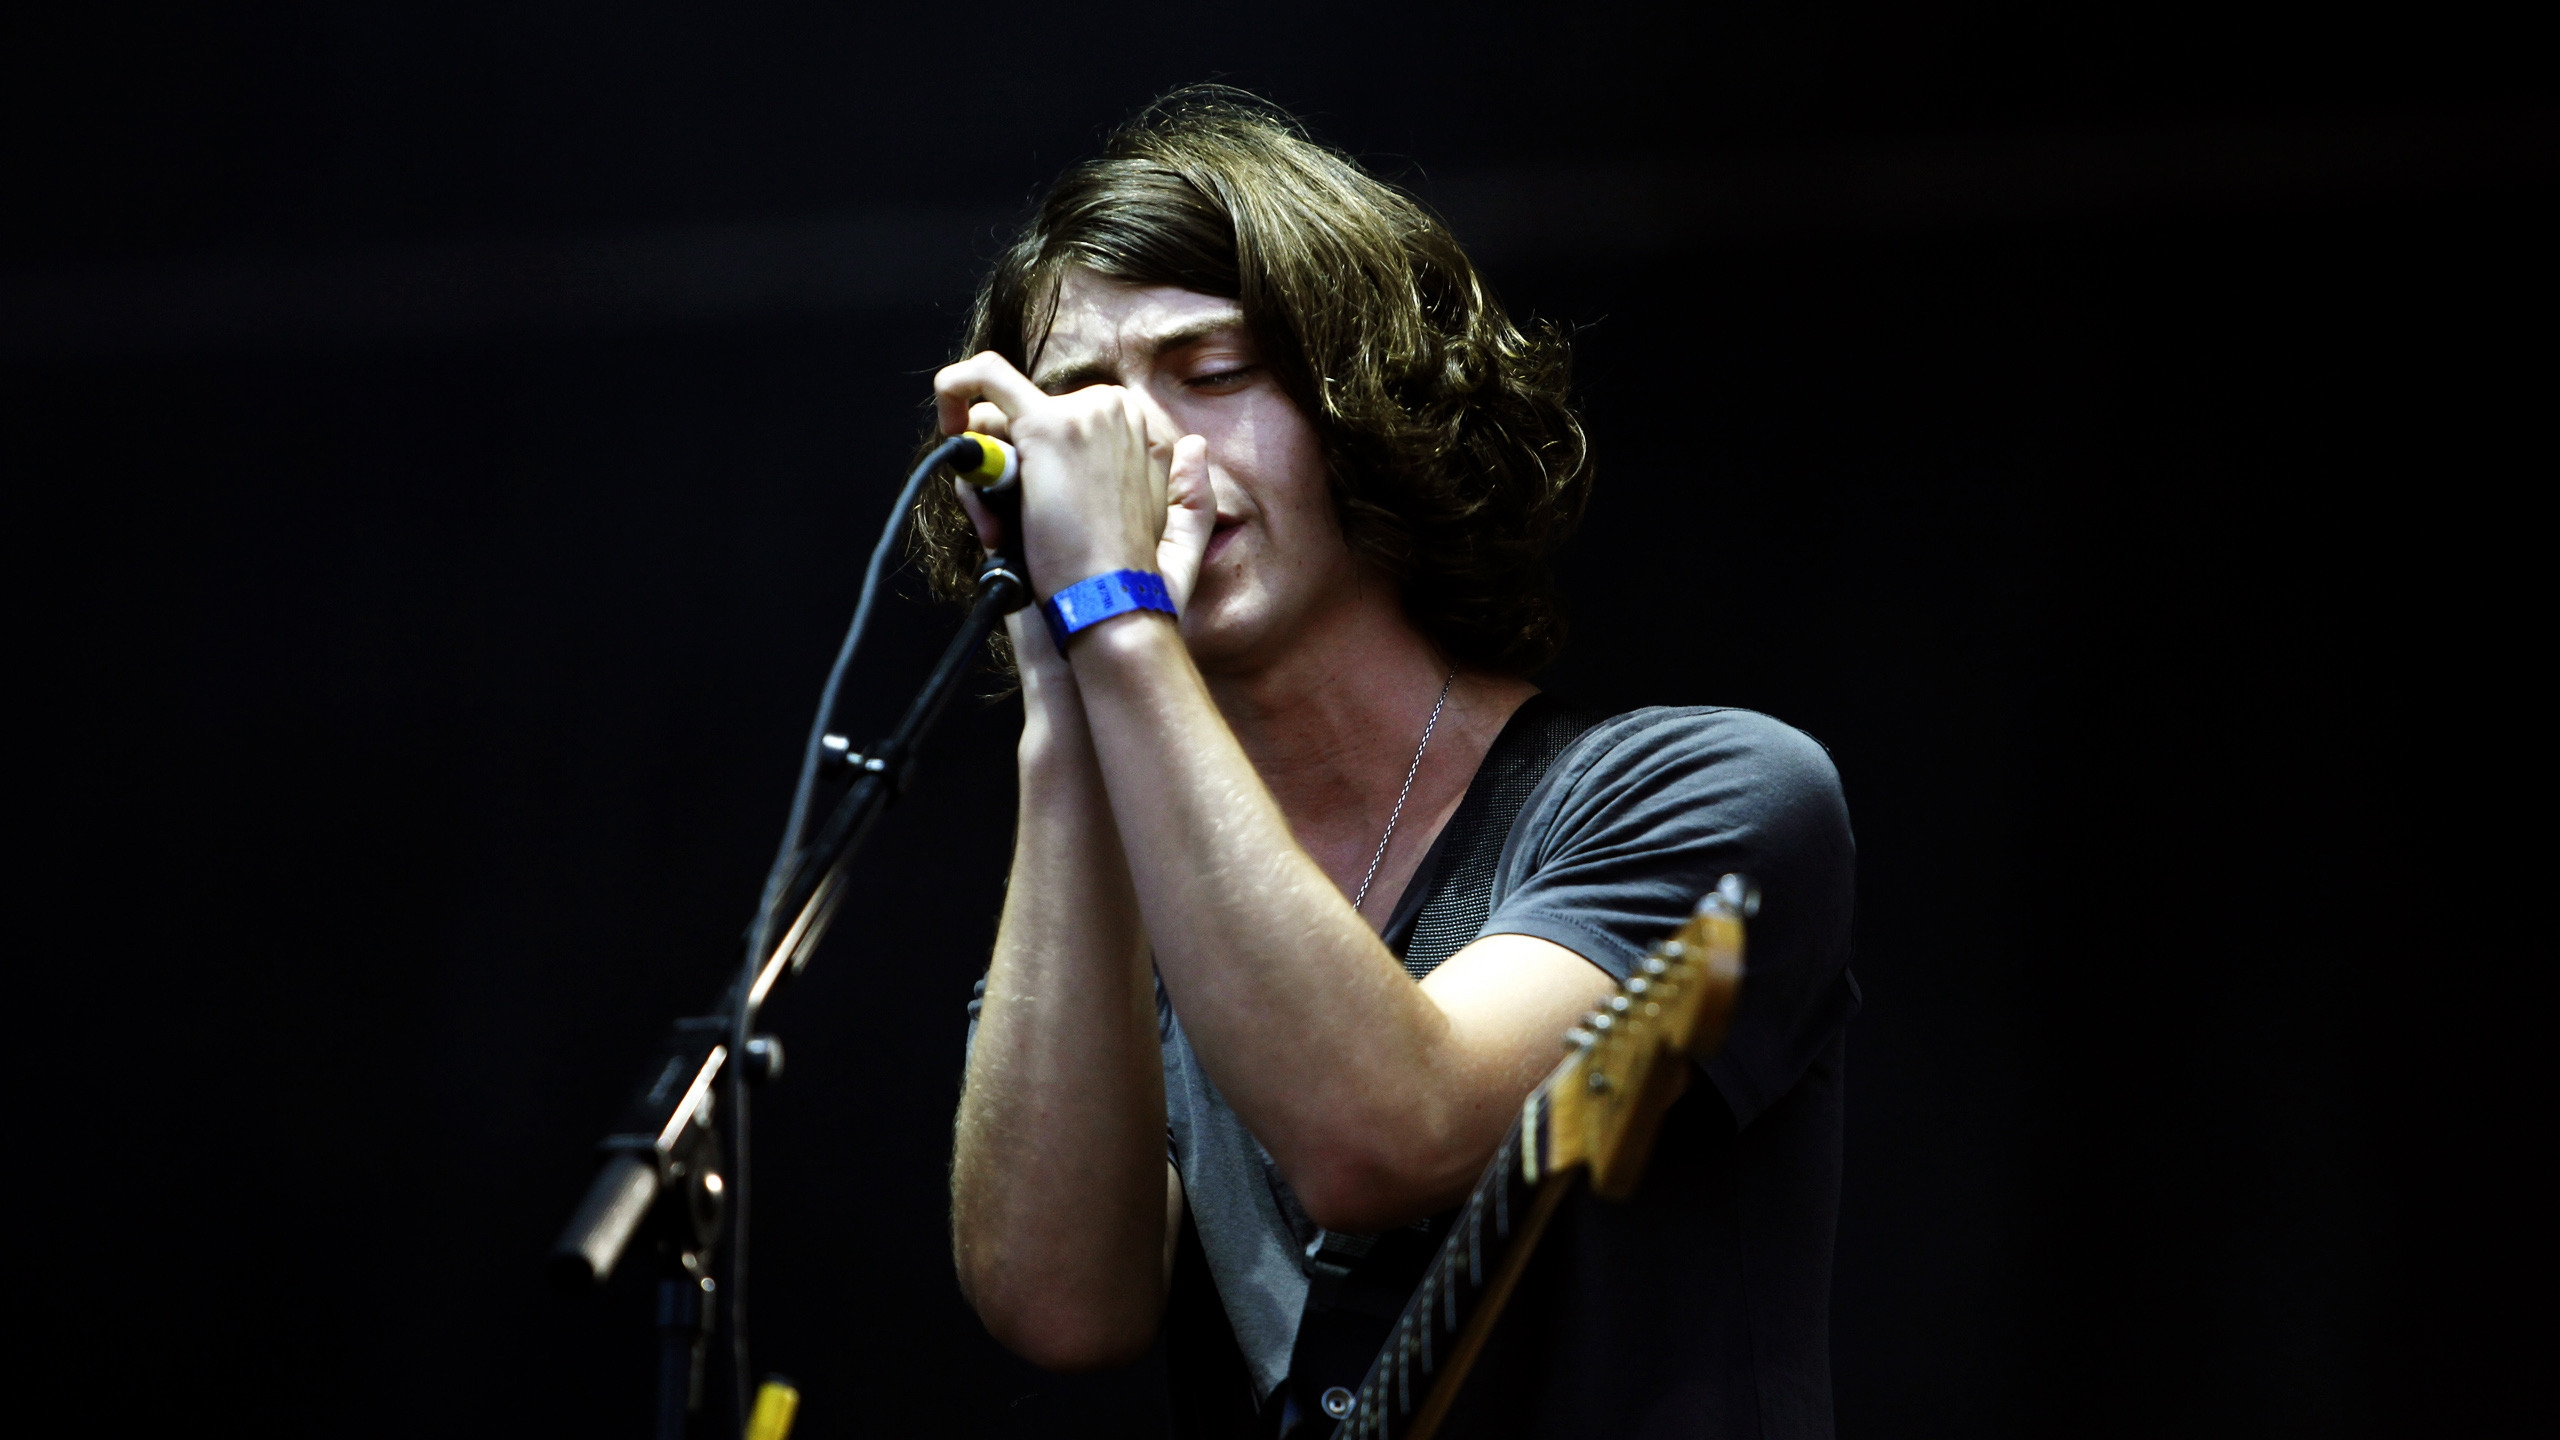 Alex Turner Performing for 2560x1440 HDTV resolution